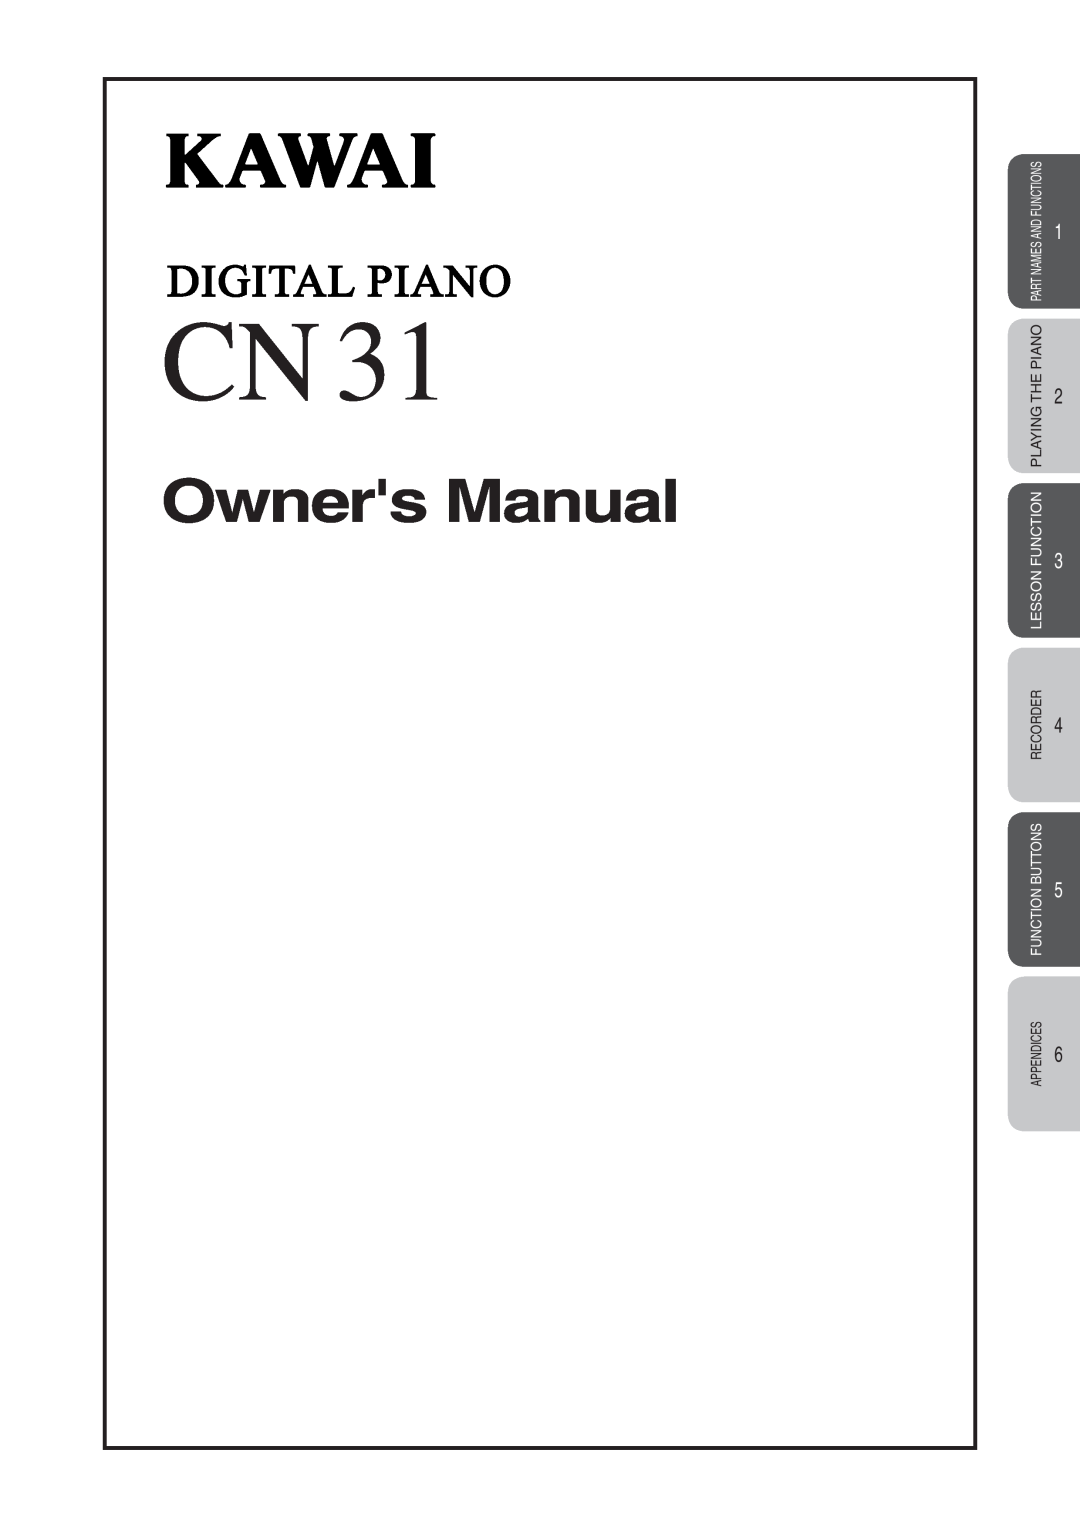 Kawai CN31 manual Owners Manual, The Piano, Playing, Lesson, Buttons, Recorder, And Functions, Appendices, Part Names 